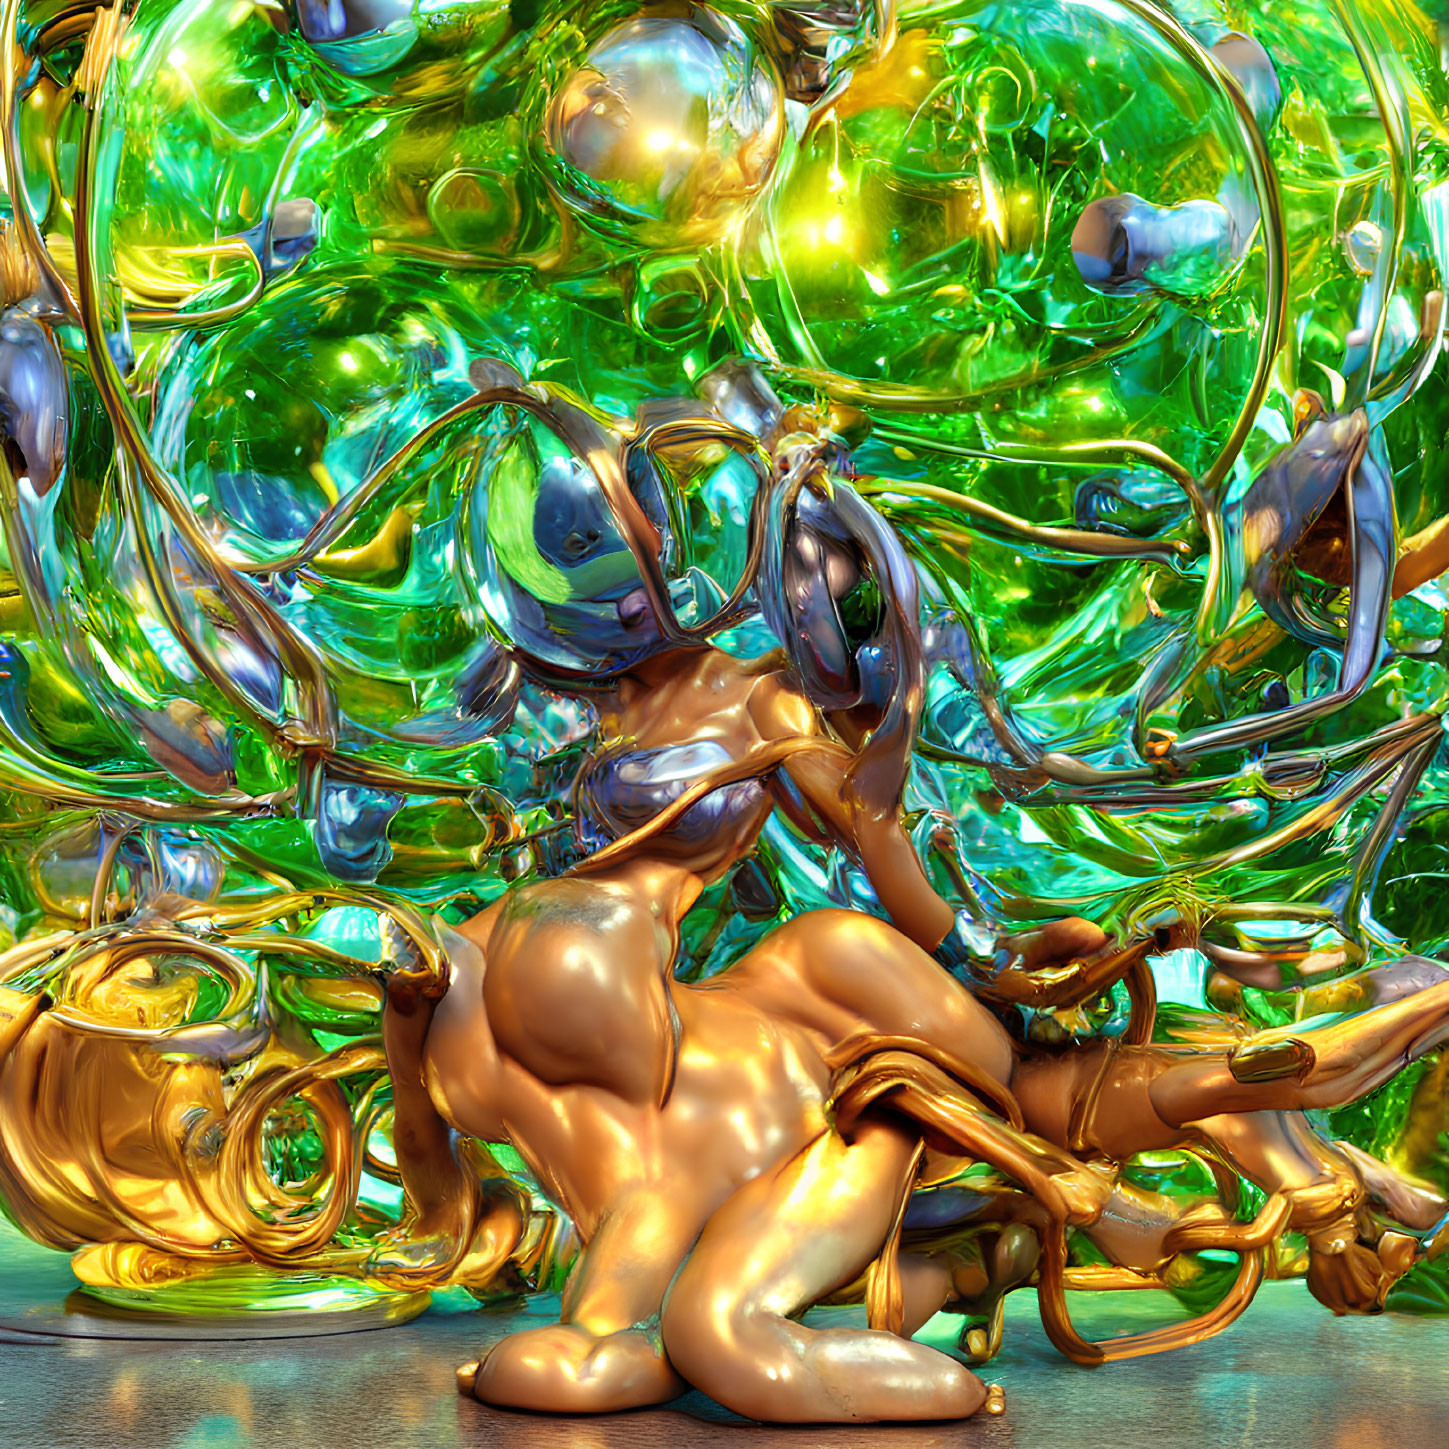 Surreal digital artwork: golden figure with glass-like structures on green background